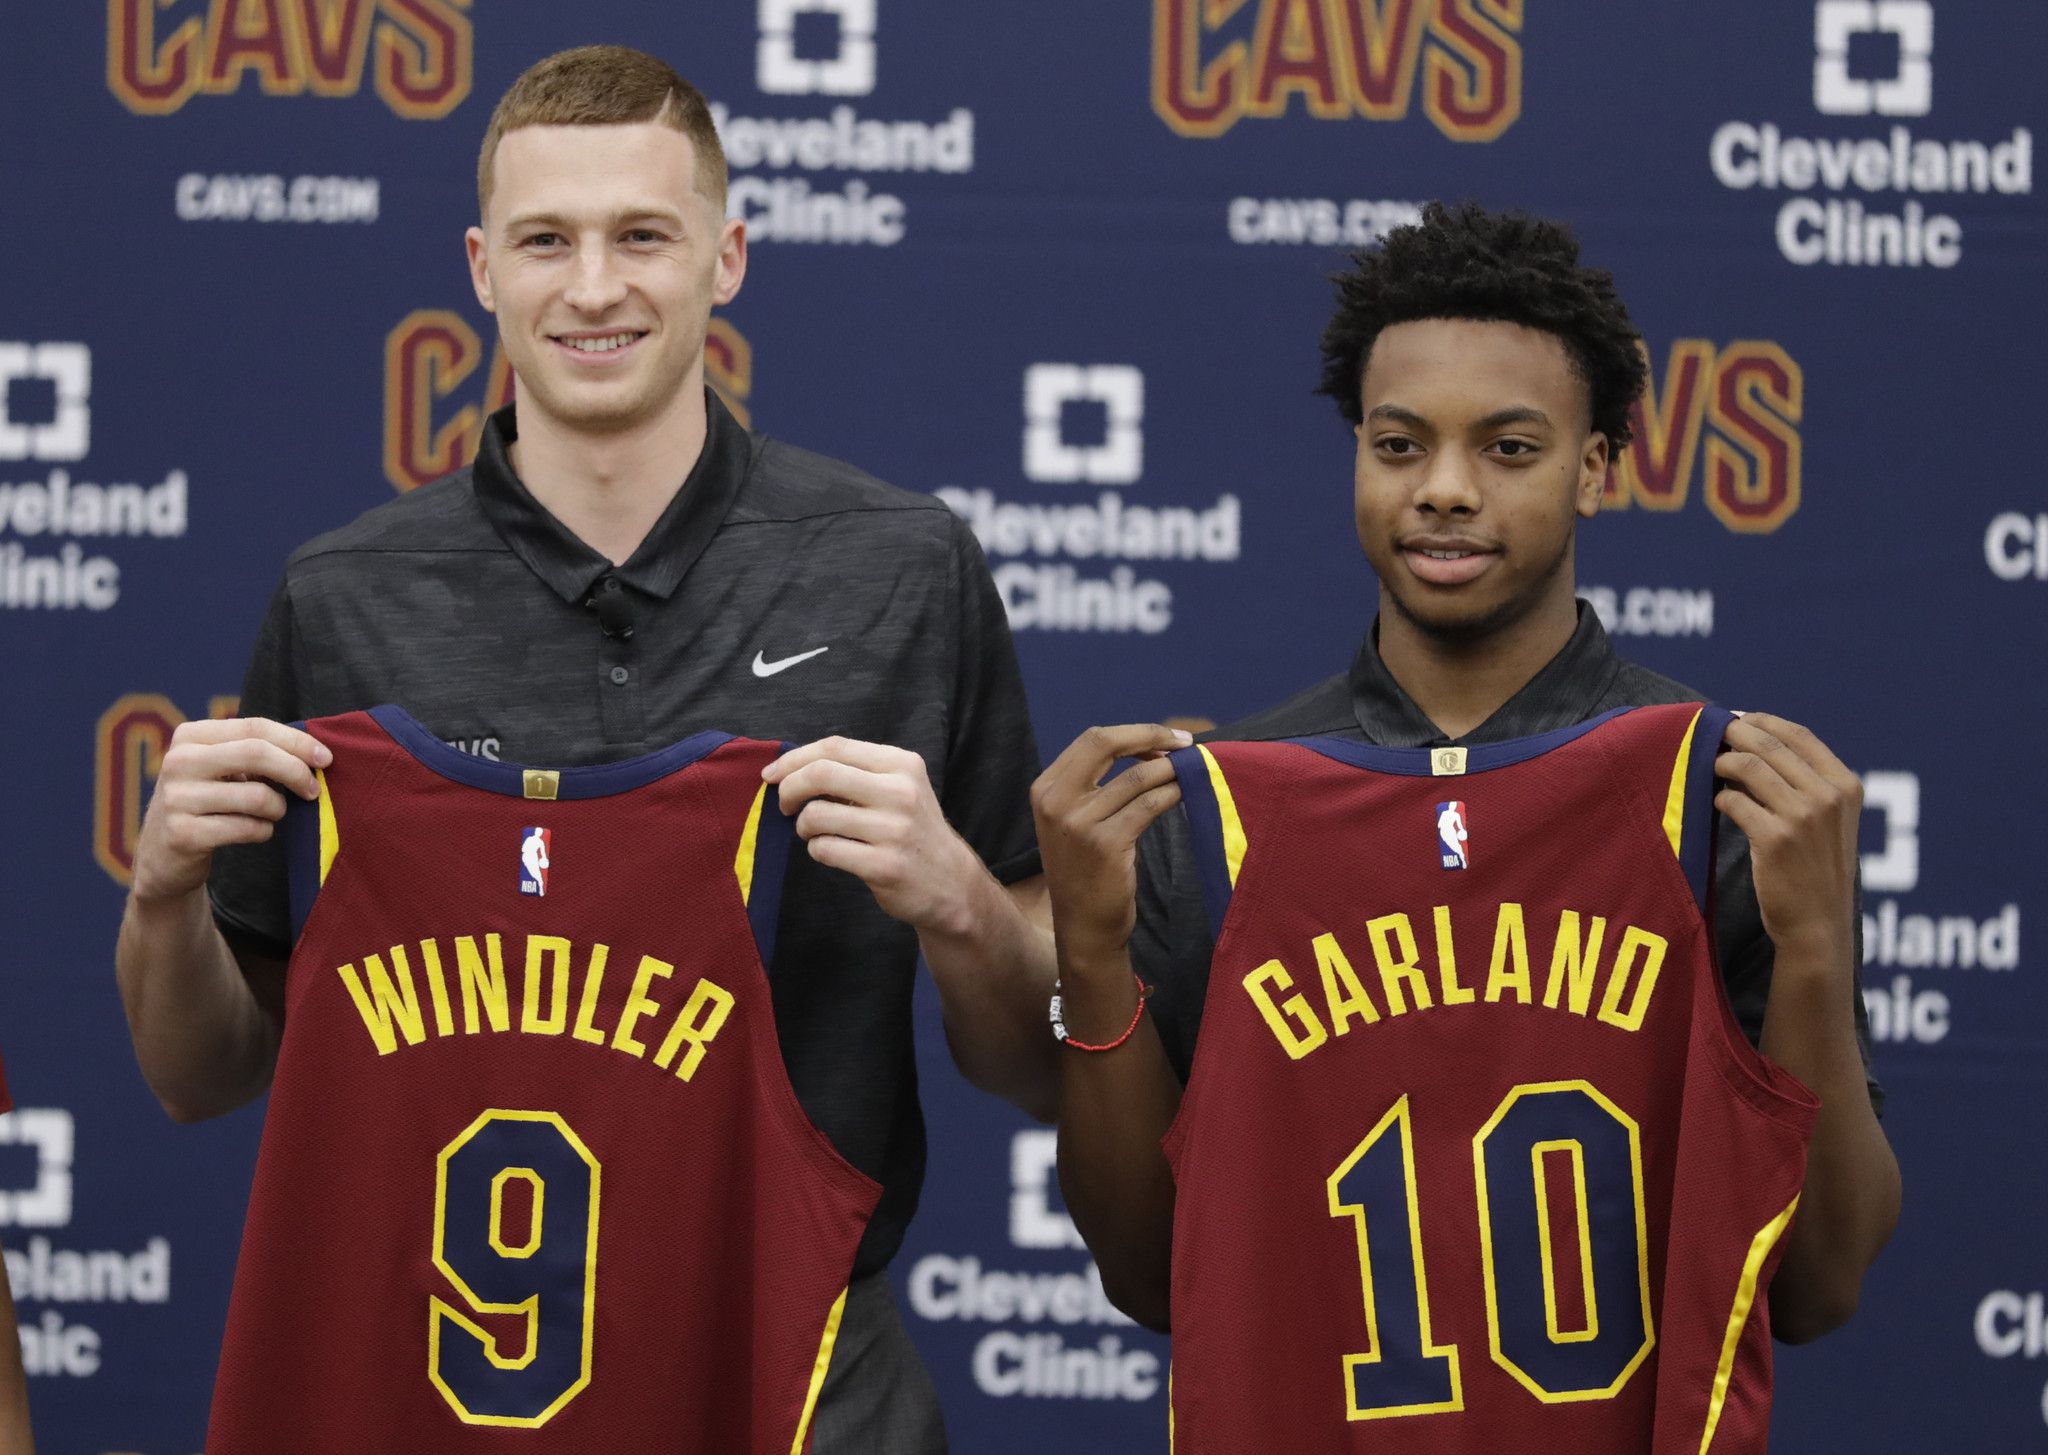 Hutton: Darius Garland grew up in Gary. He gets it. His dream continues  with the Cleveland Cavaliers.